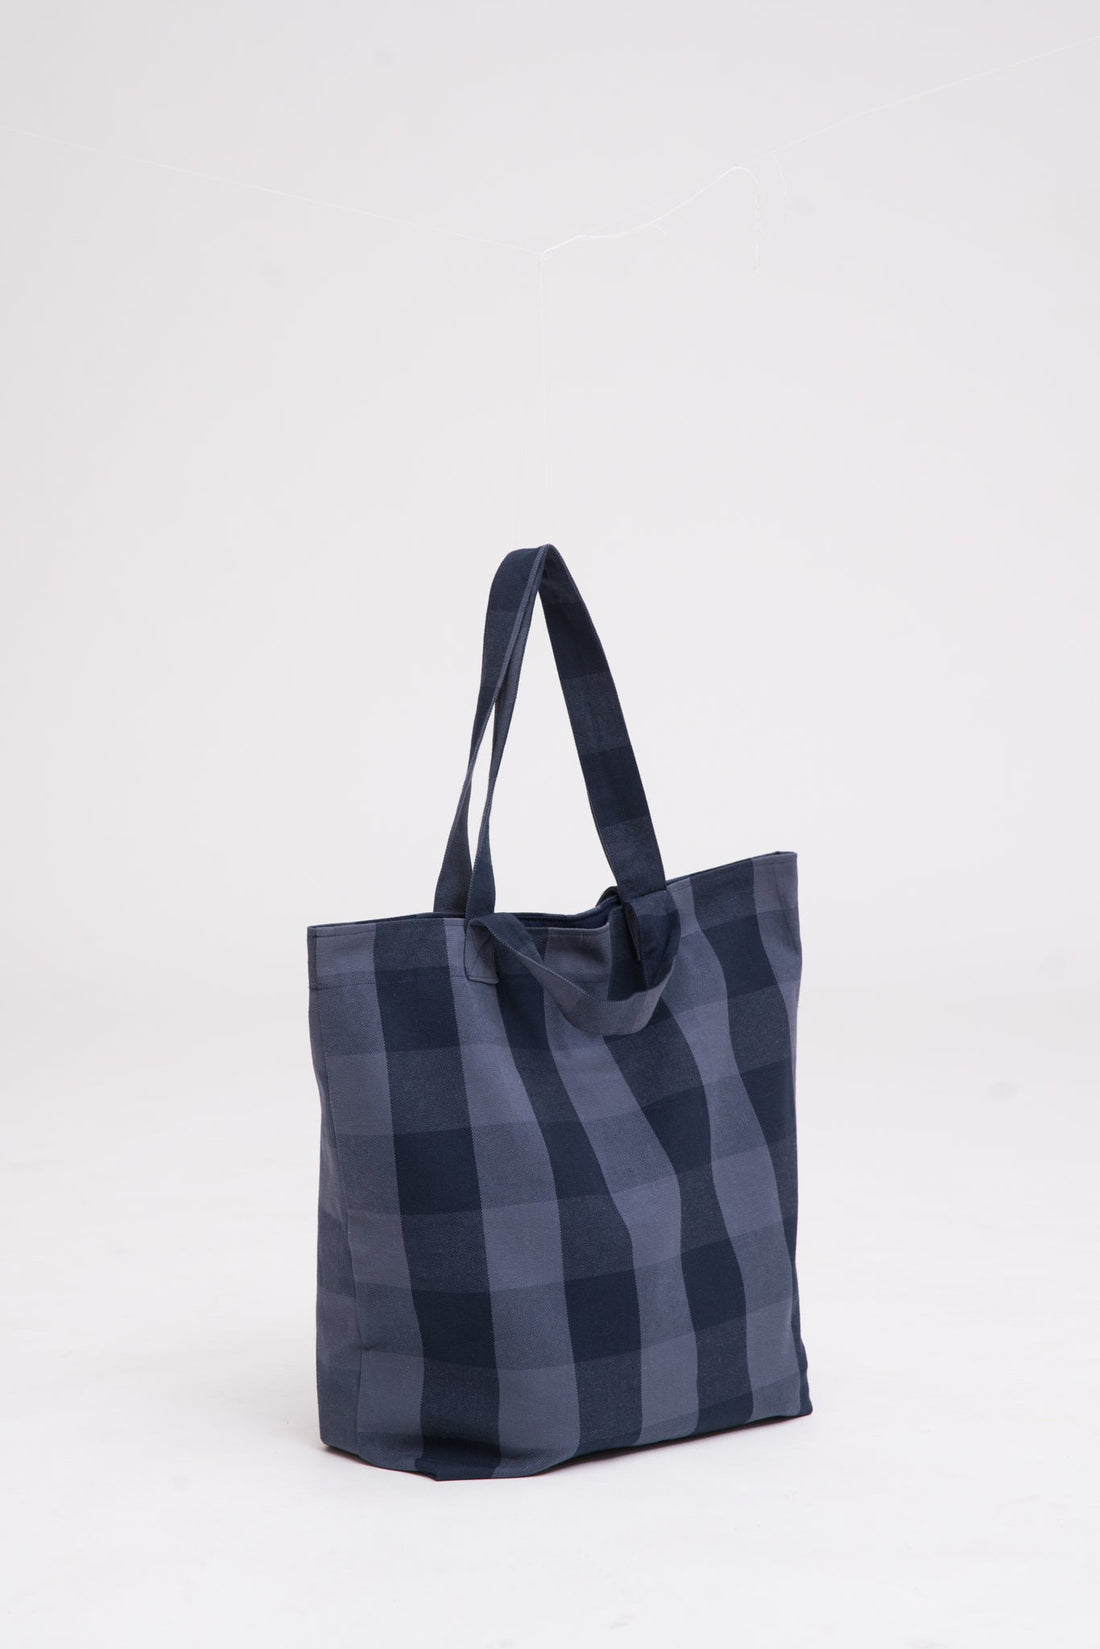 A blue checked tote bag